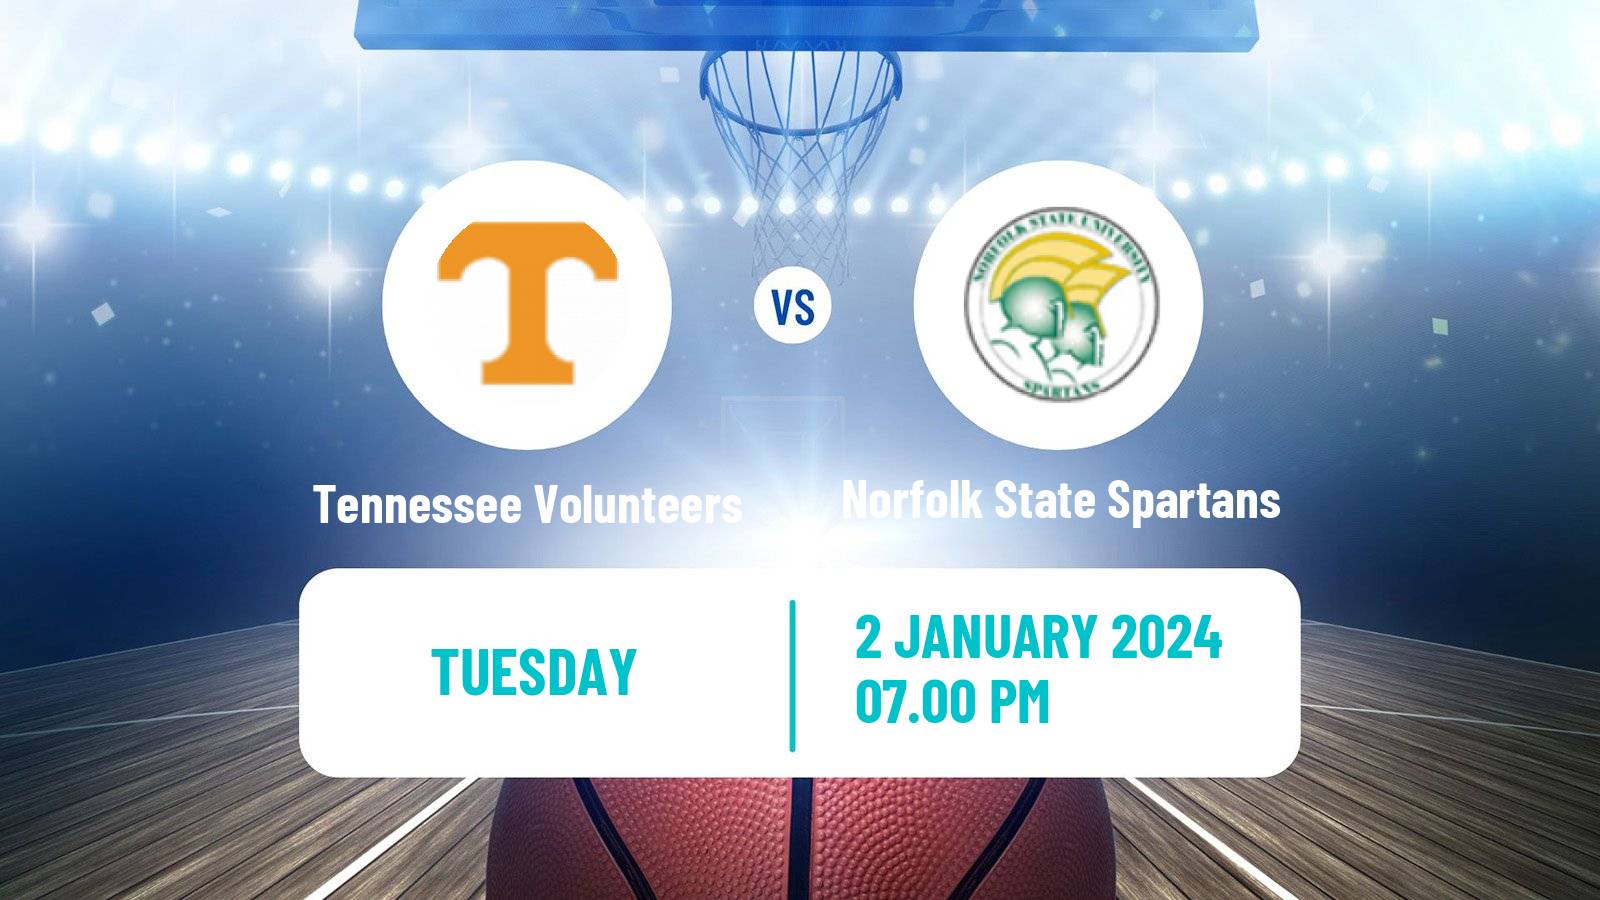 Basketball NCAA College Basketball Tennessee Volunteers - Norfolk State Spartans